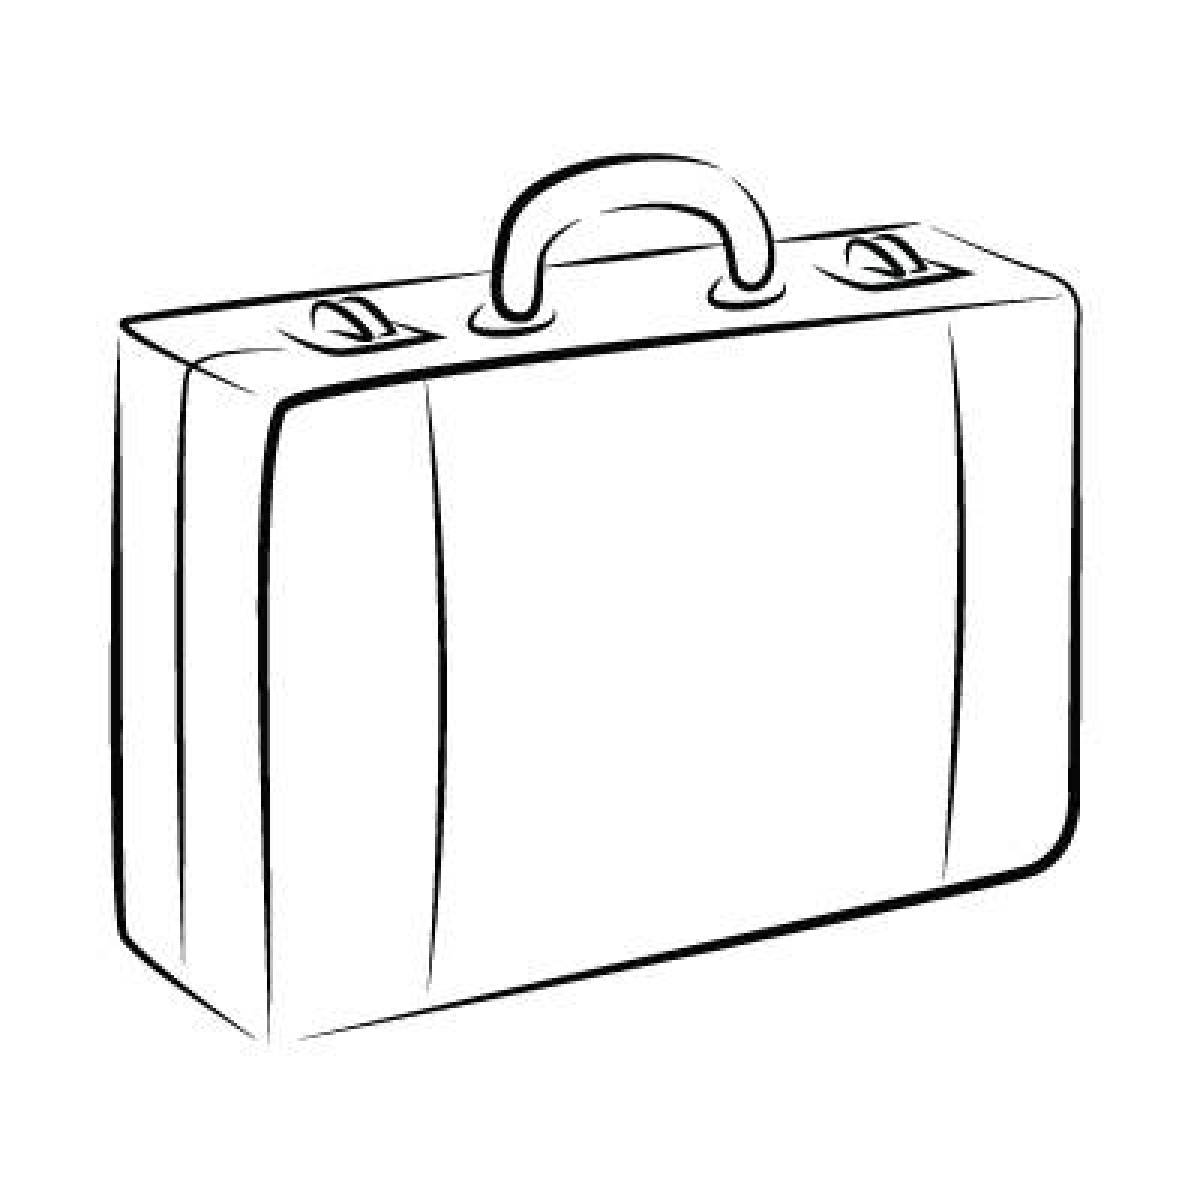 Coloring for an elegant suitcase